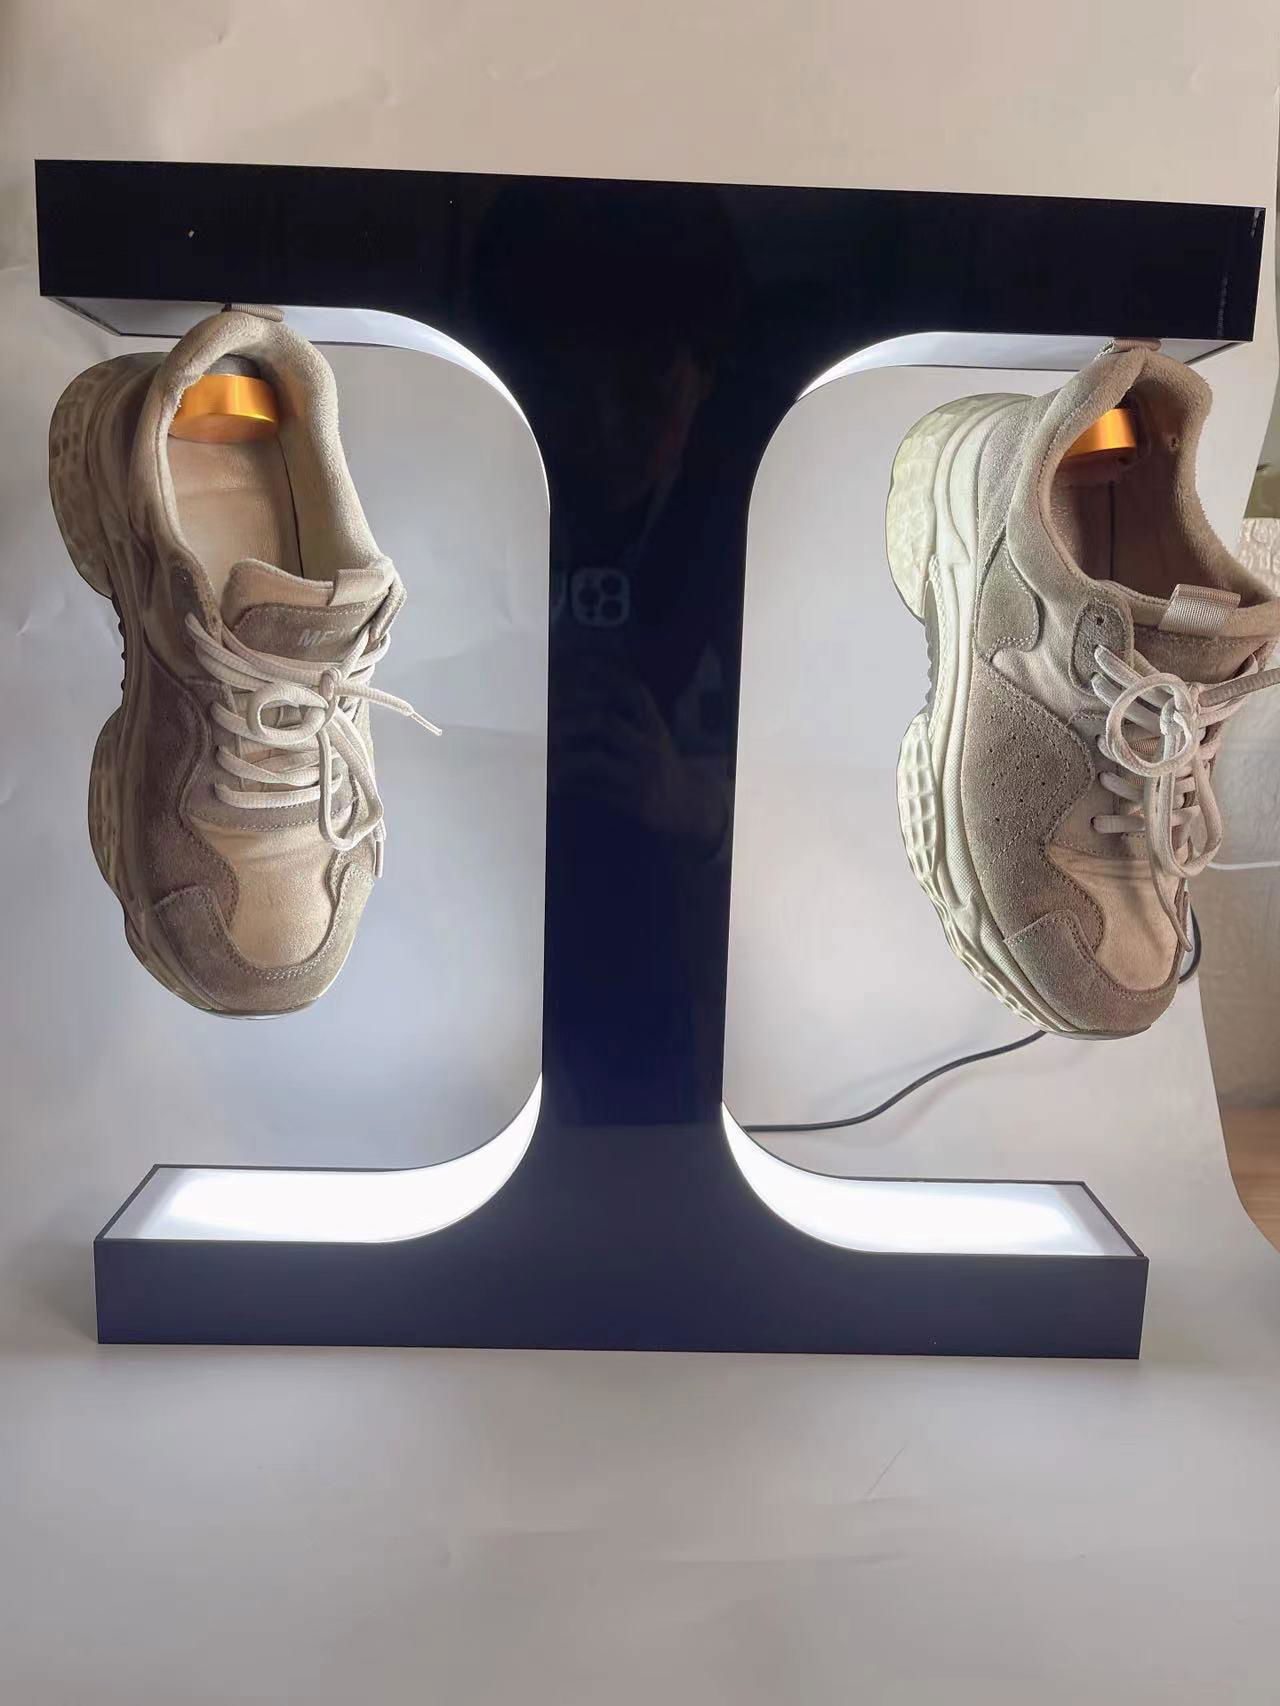 customize magnetic levitation floating double shoes display racks with led light